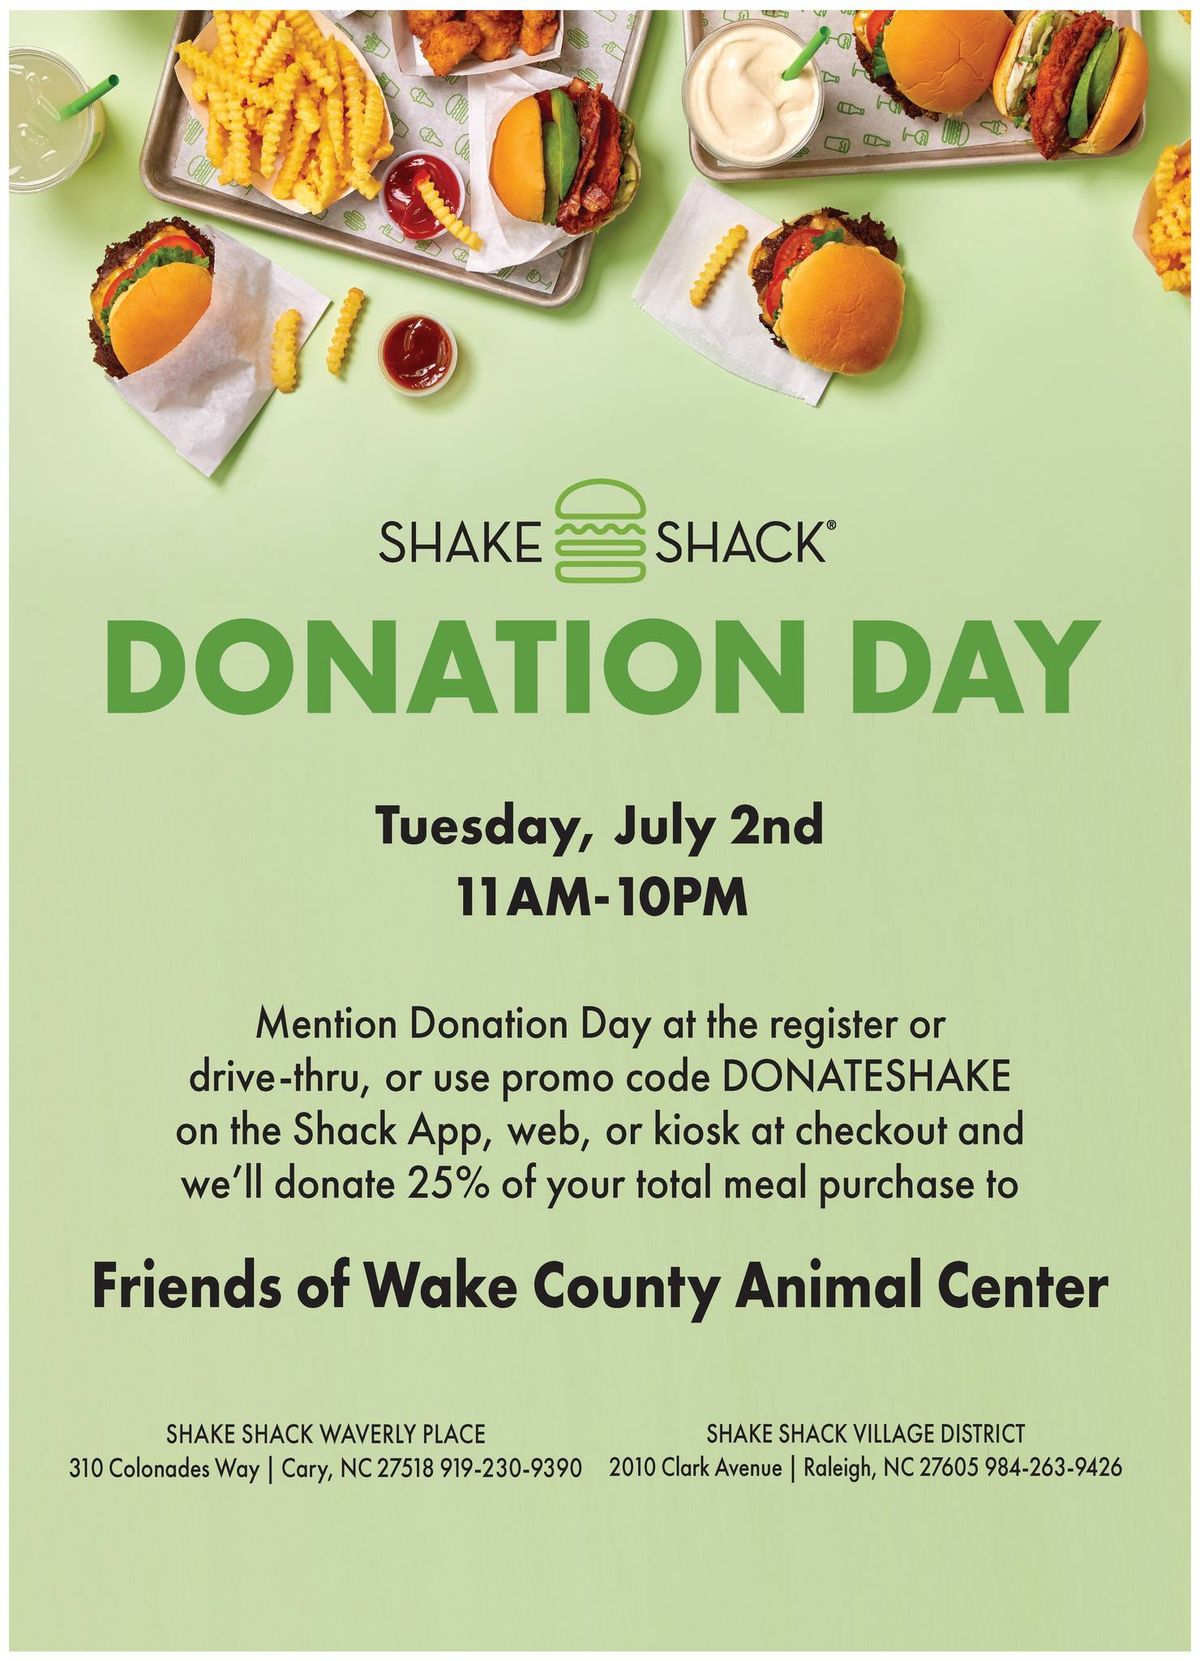 Shake Shack Donation Day for Friends of Wake County Animal Center